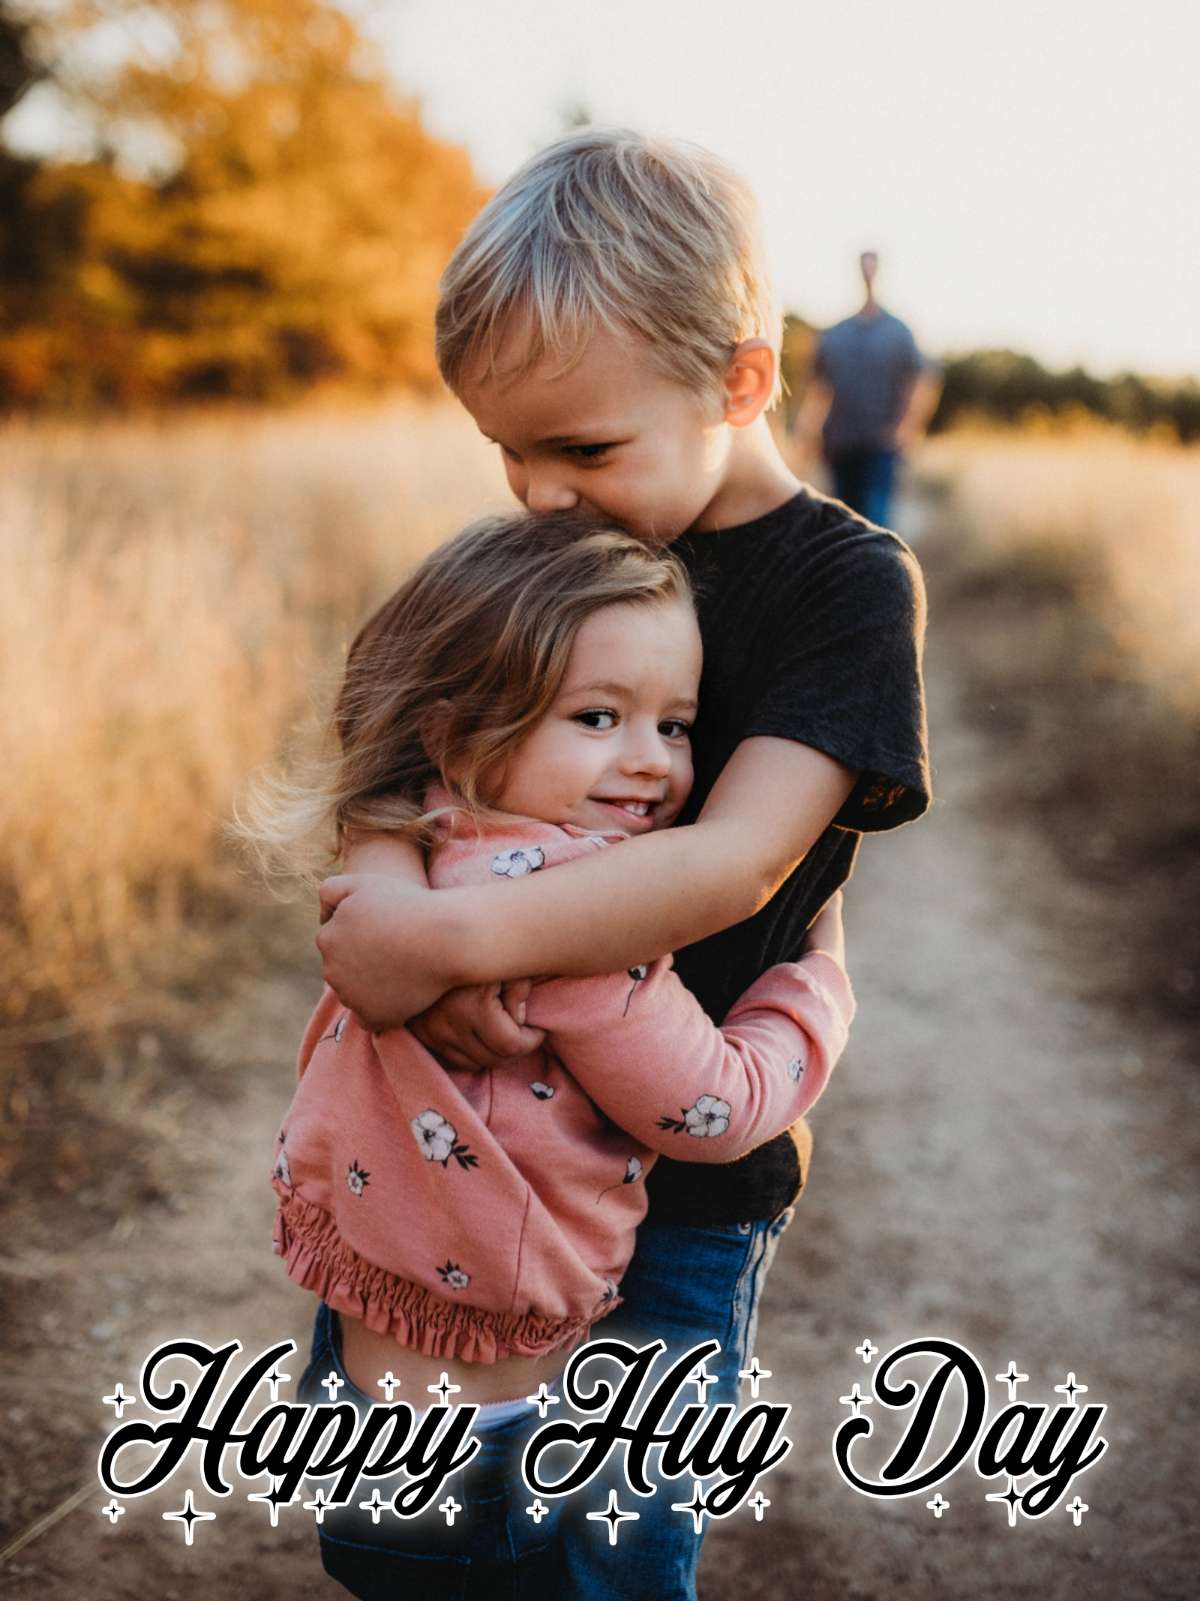 Cute Happy Hug Day Images Download